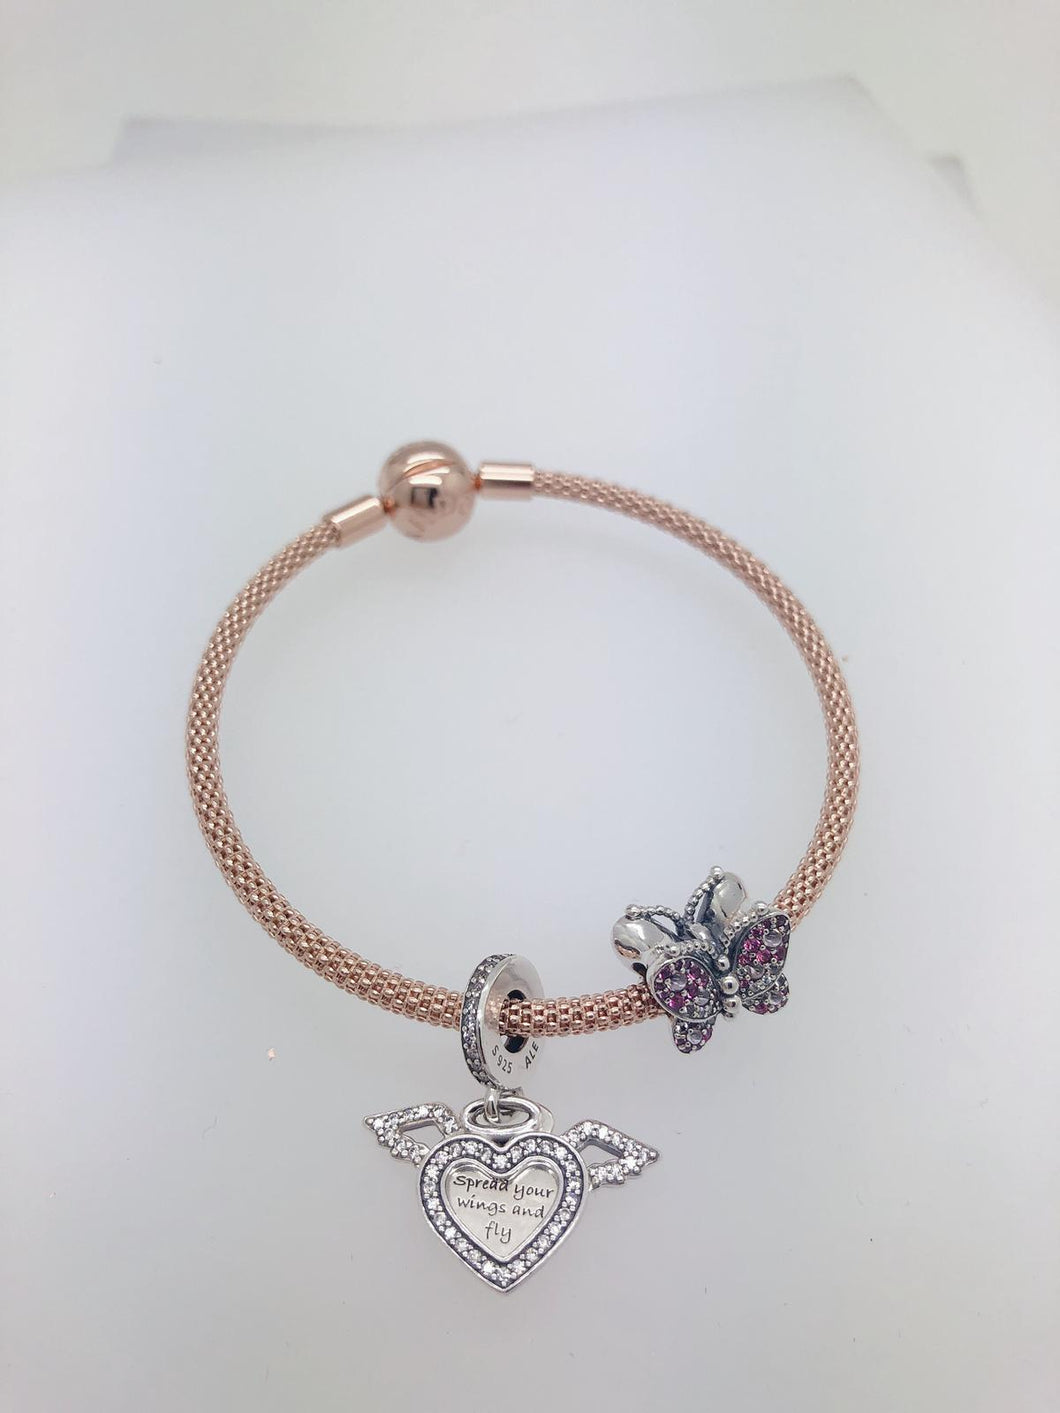 Customized Pandora Bracelet and 2 charms - Curbside pickup